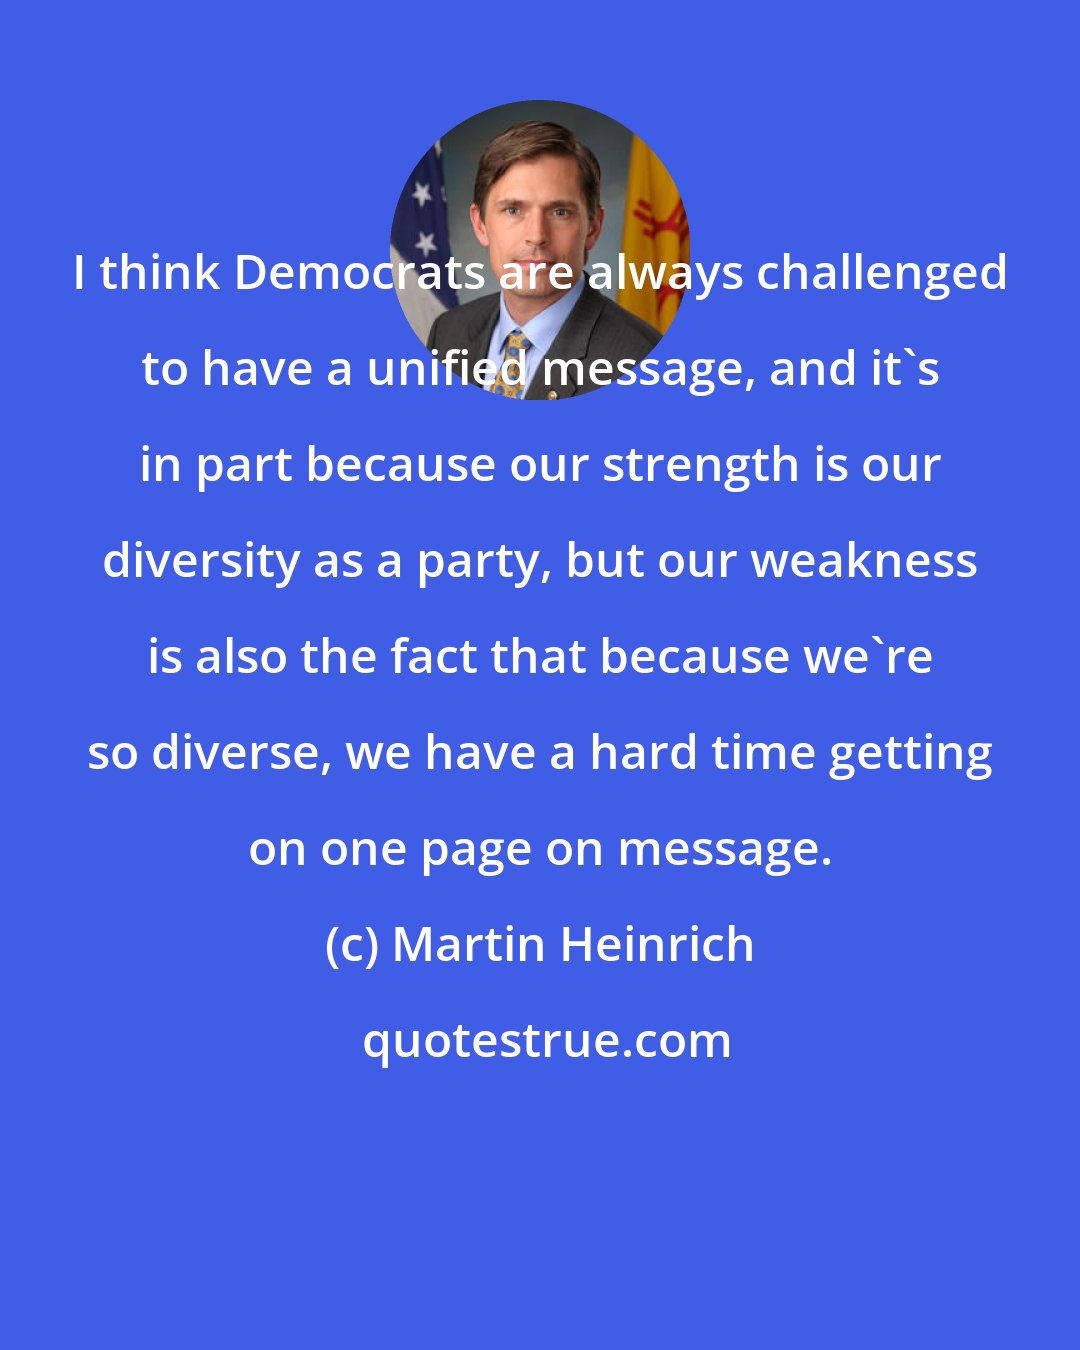 Martin Heinrich: I think Democrats are always challenged to have a unified message, and it's in part because our strength is our diversity as a party, but our weakness is also the fact that because we're so diverse, we have a hard time getting on one page on message.